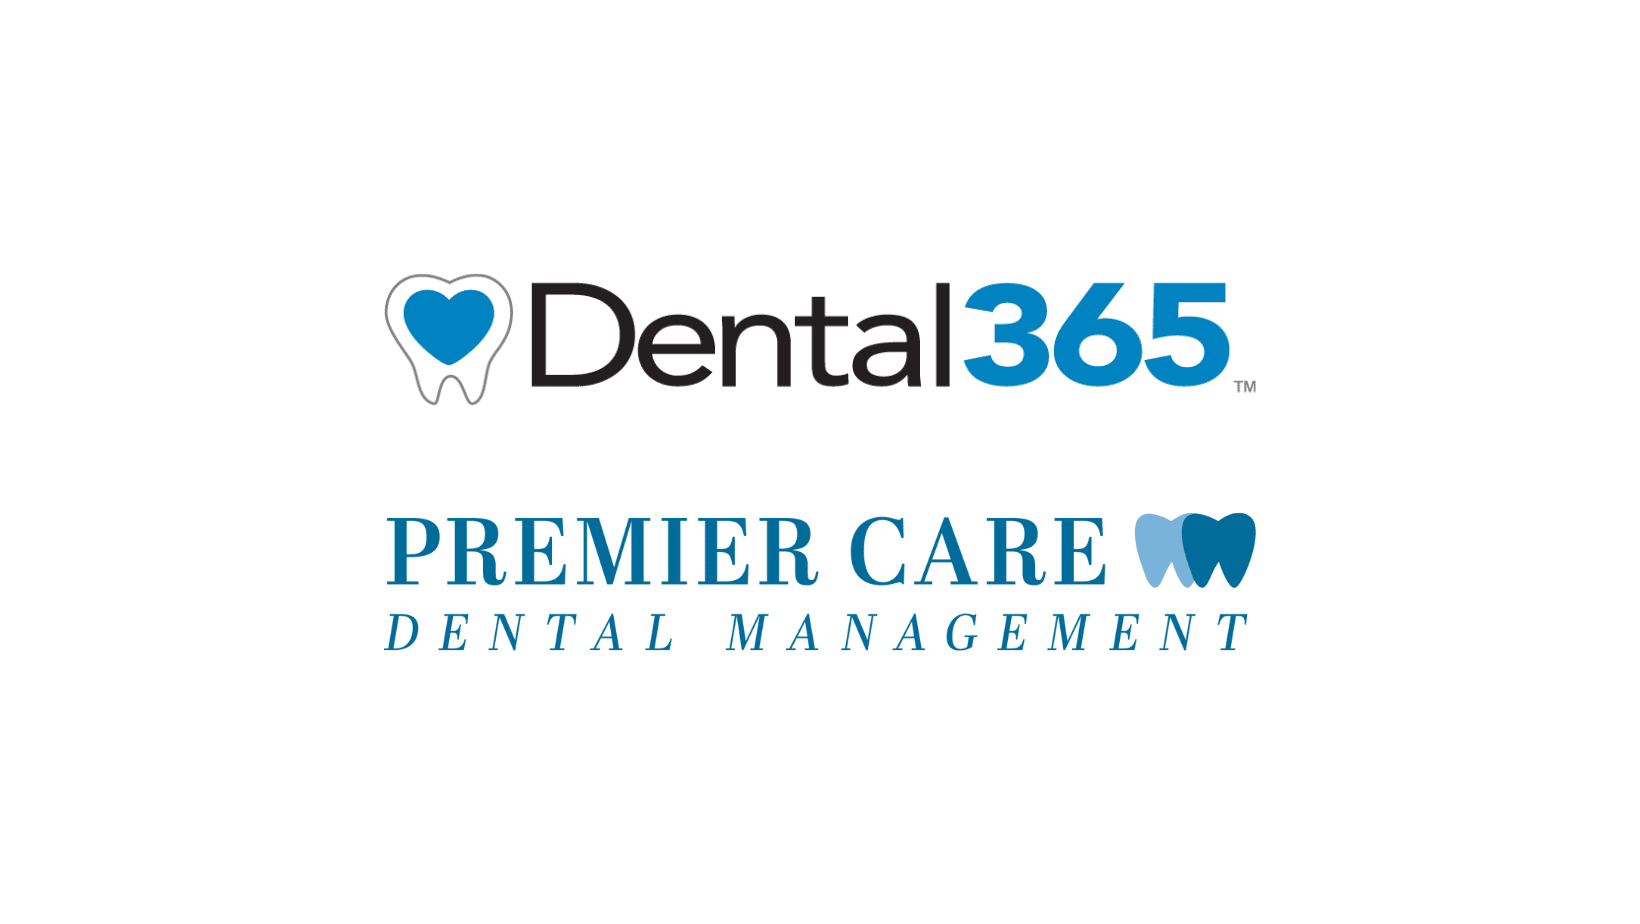 Dental365 & Premier Care Dental Management Acquire New Jersey DSO